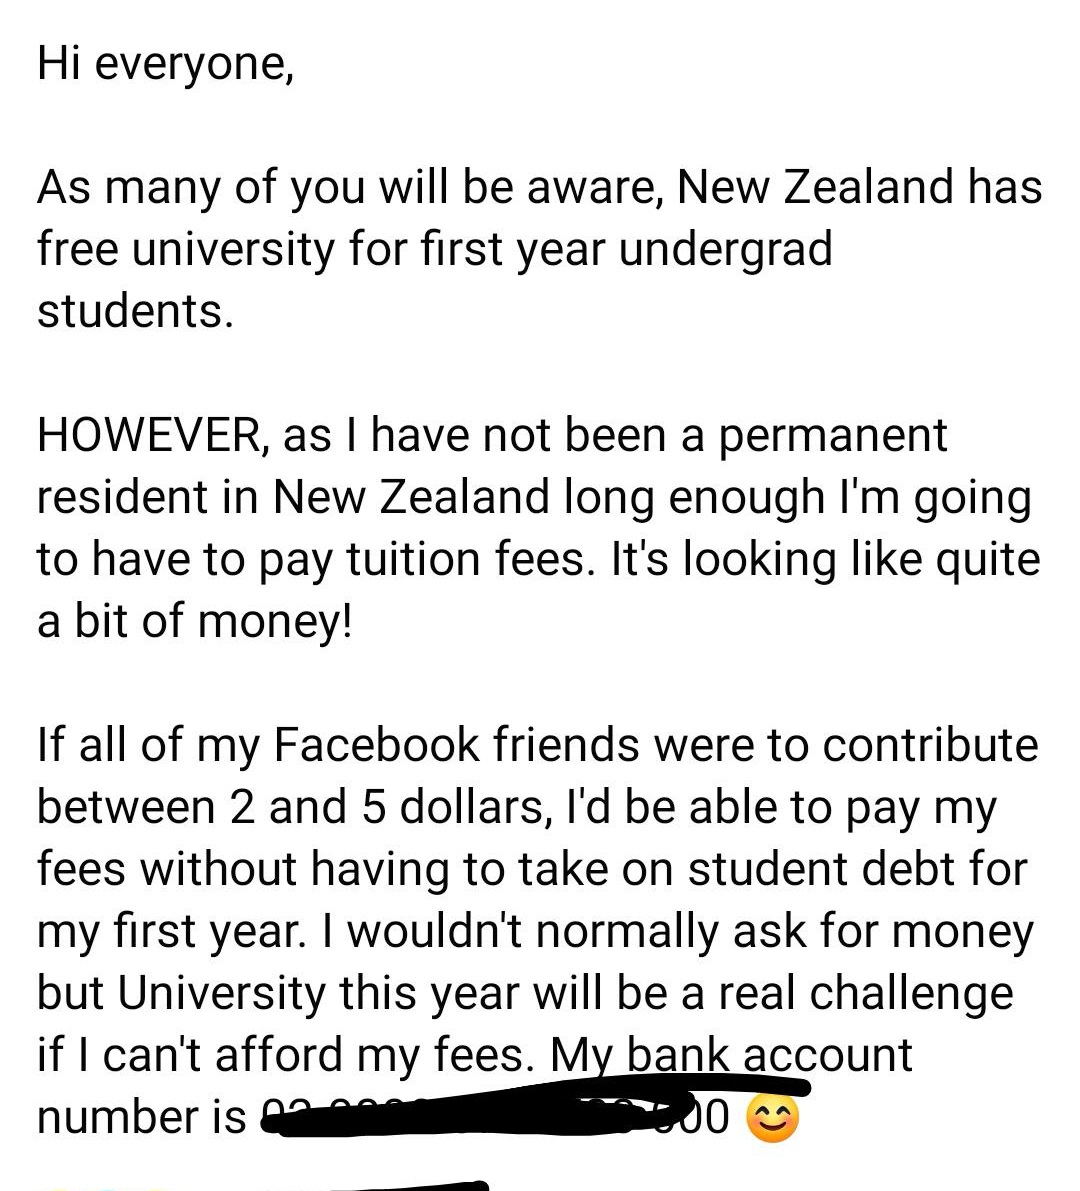 angle - Hi everyone, As many of you will be aware, New Zealand has free university for first year undergrad students. However, as I have not been a permanent resident in New Zealand long enough I'm going to have to pay tuition fees. It's looking quite a b